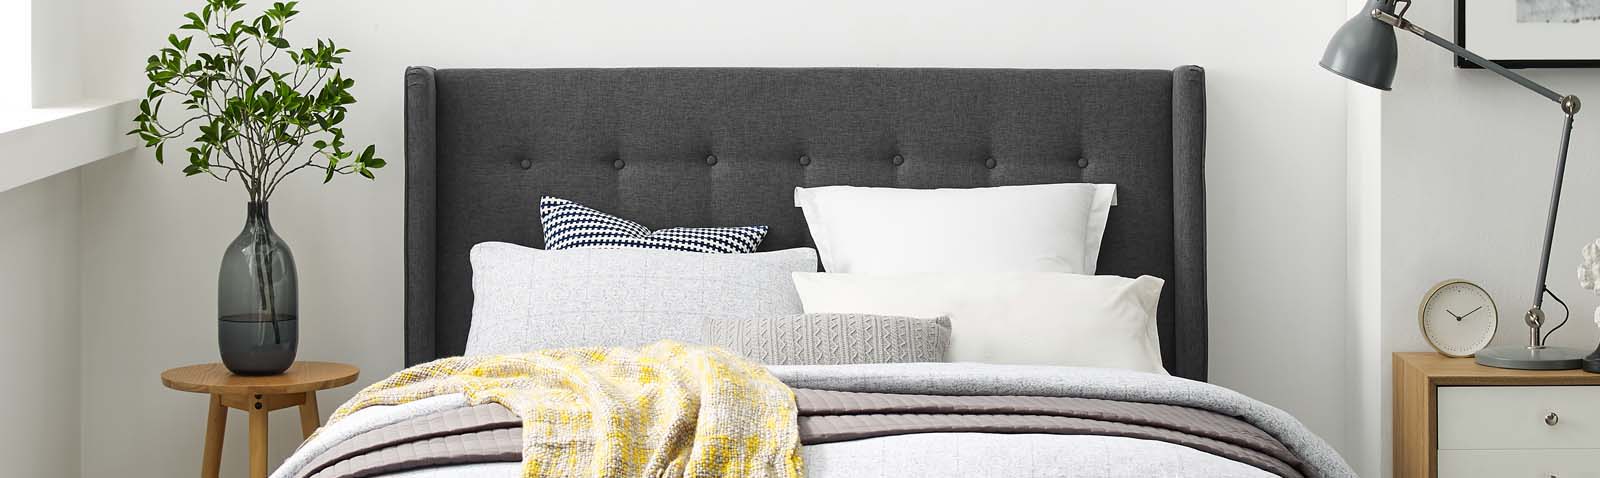 Complete your bedroom with a headboard from Homethreads